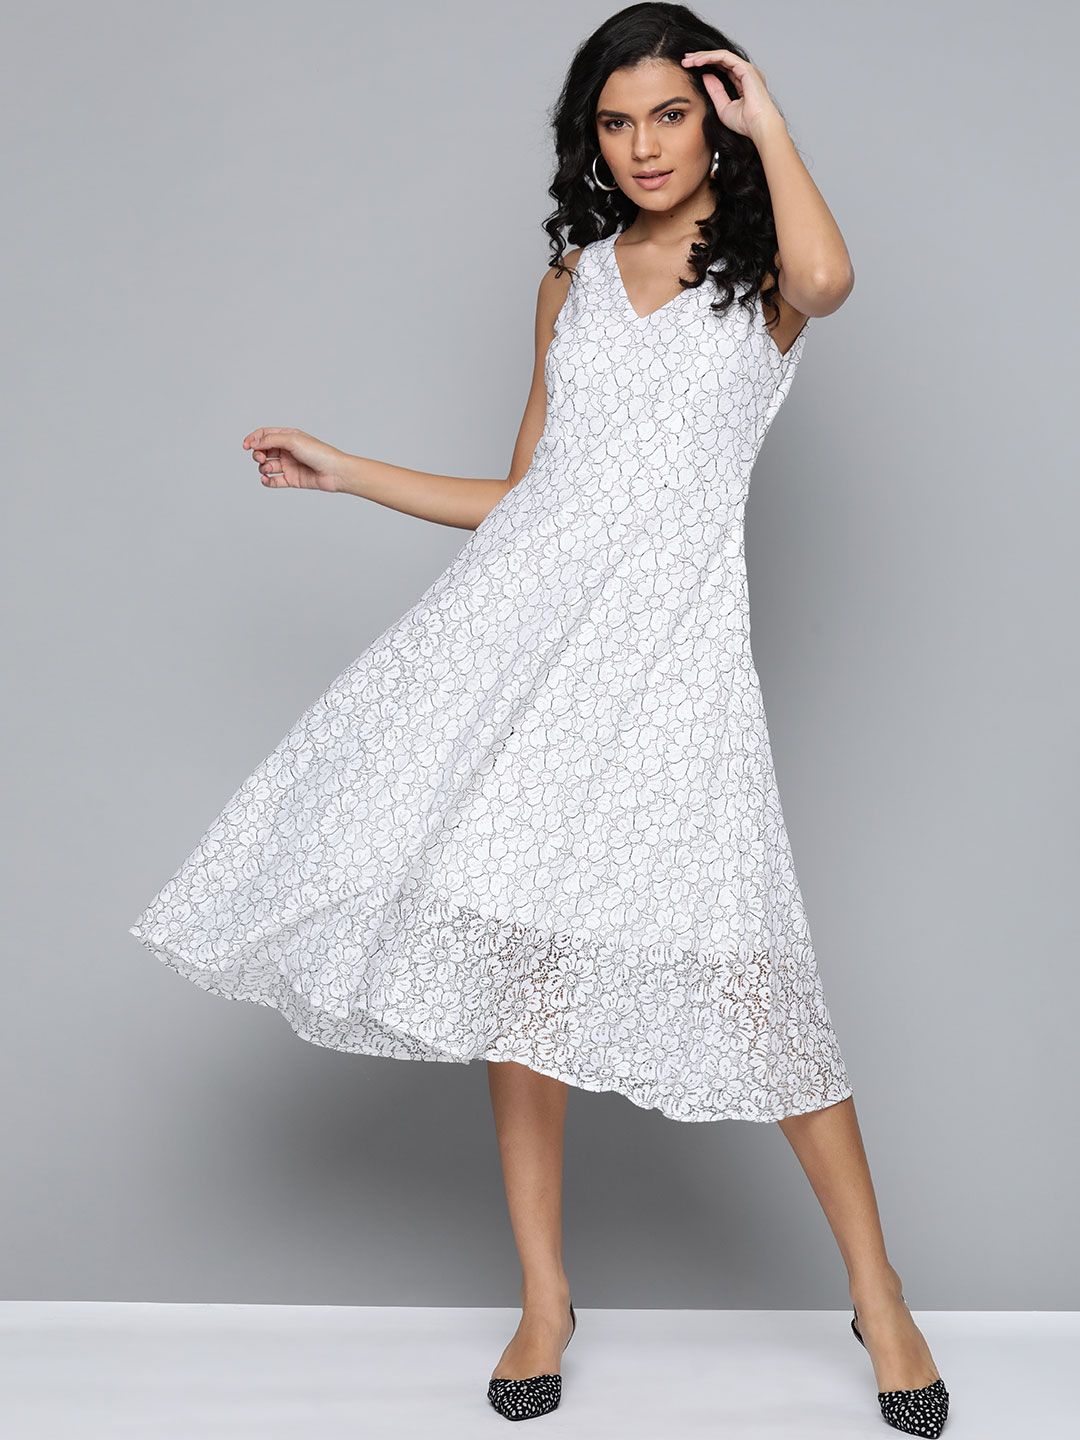 SASSAFRAS White & Black Floral Lace A-Line Dress Price in India